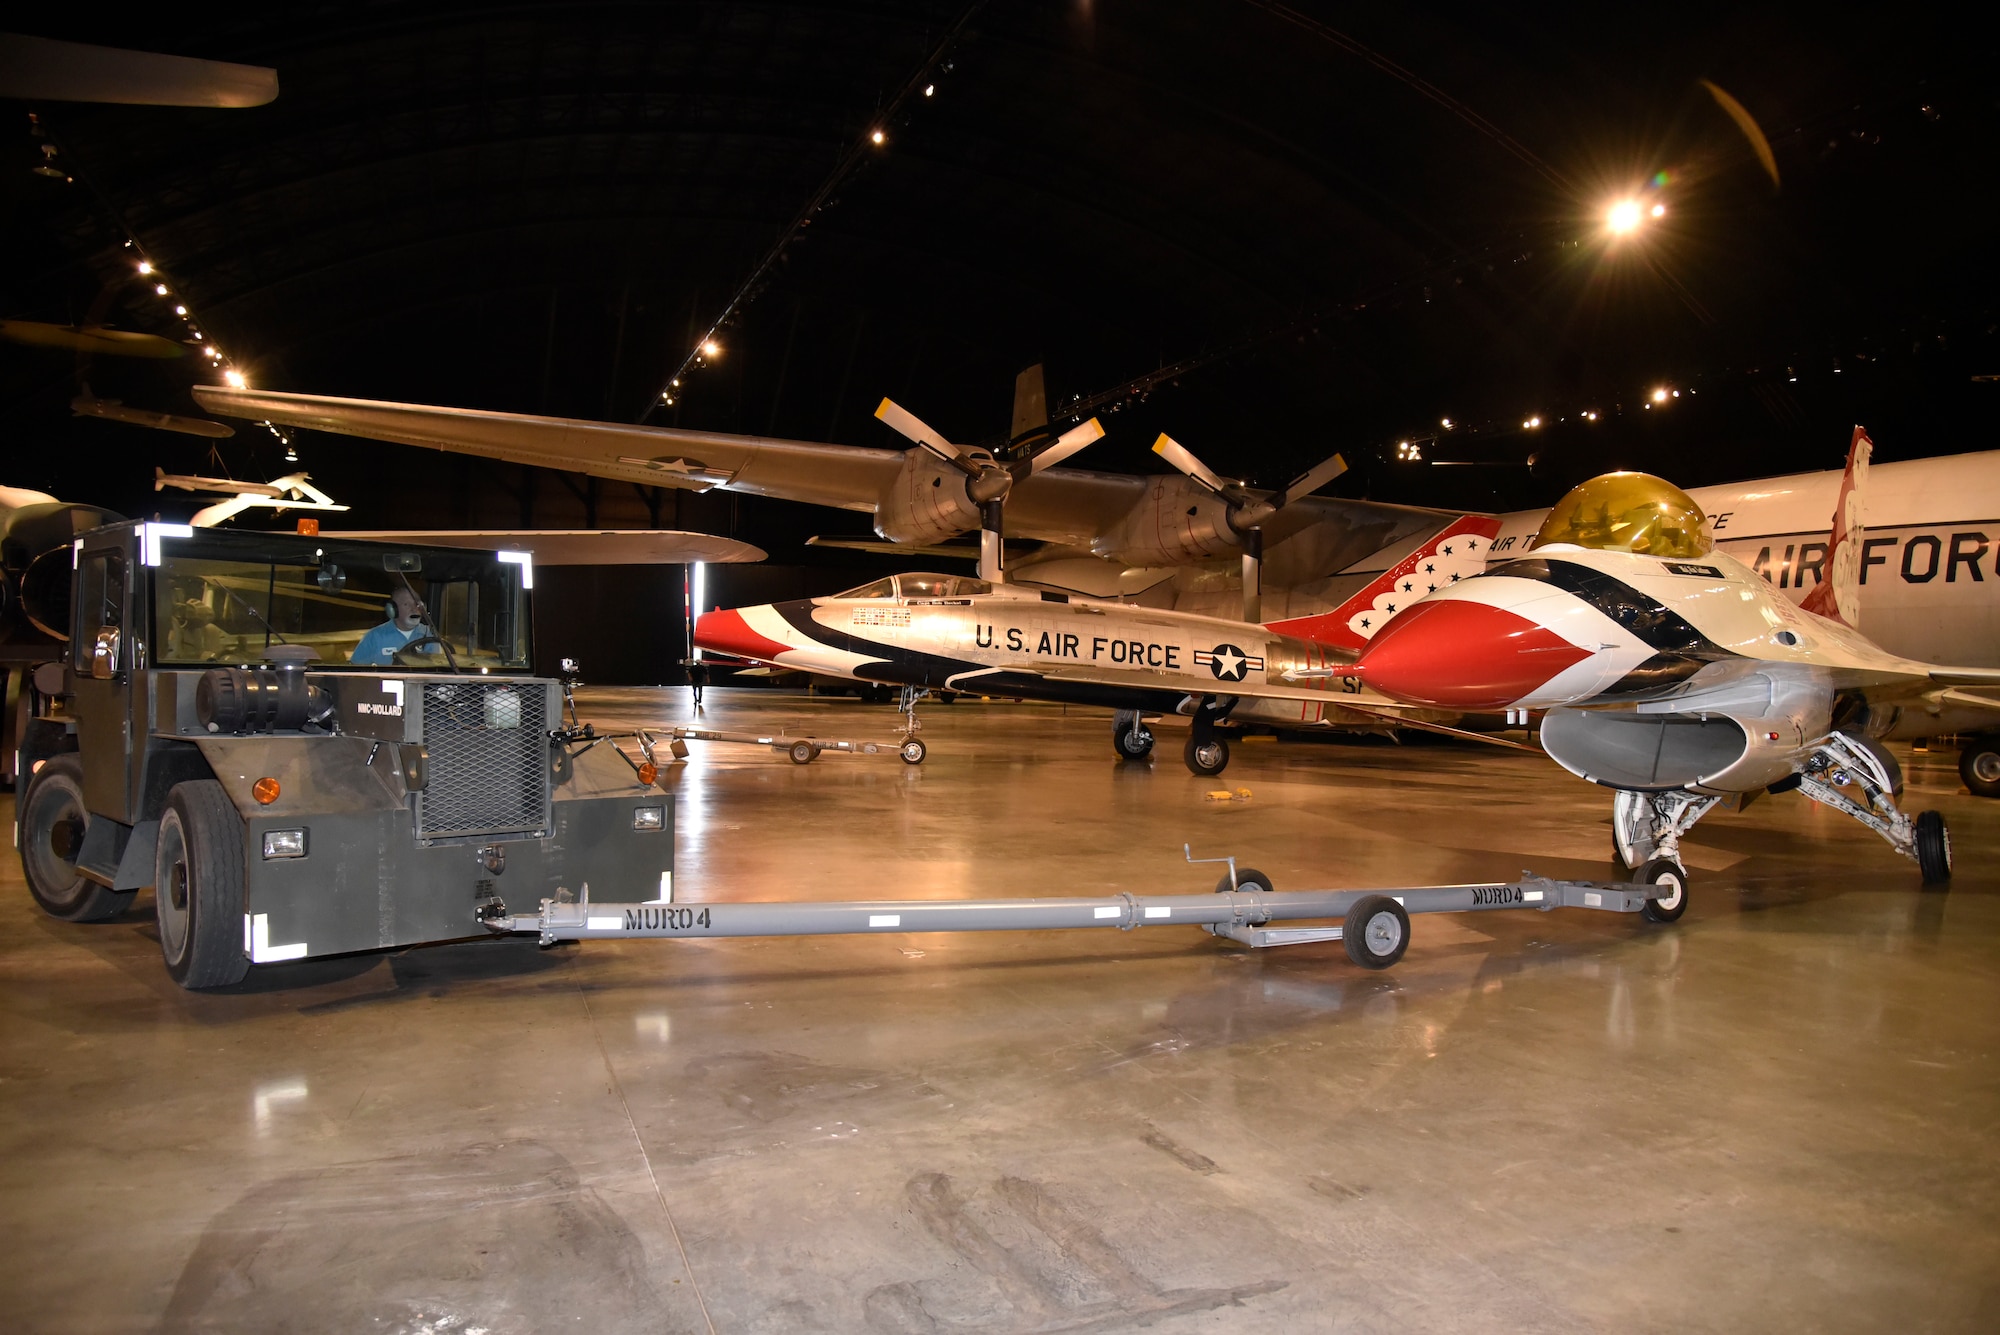 DAYTON, Ohio -- General Dynamics F-16A Fighting Falcon being moved into position in the Cold War Gallery at the National Museum of the United States Air Force. This restoration crew member worked as part of a team to complete the gallery reconfiguration on Jan. 26, 2017. (U.S. Air Force photo)